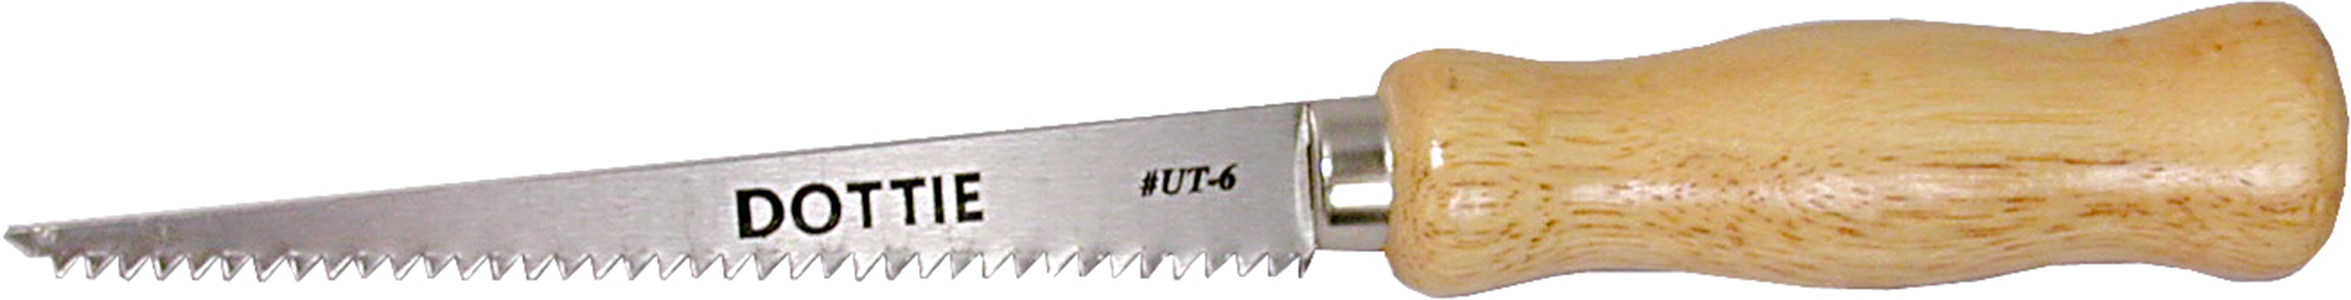 Utility Saw, 12 in. overall length, 6 in. blade length, Pistol Grip handle, Wood handle material